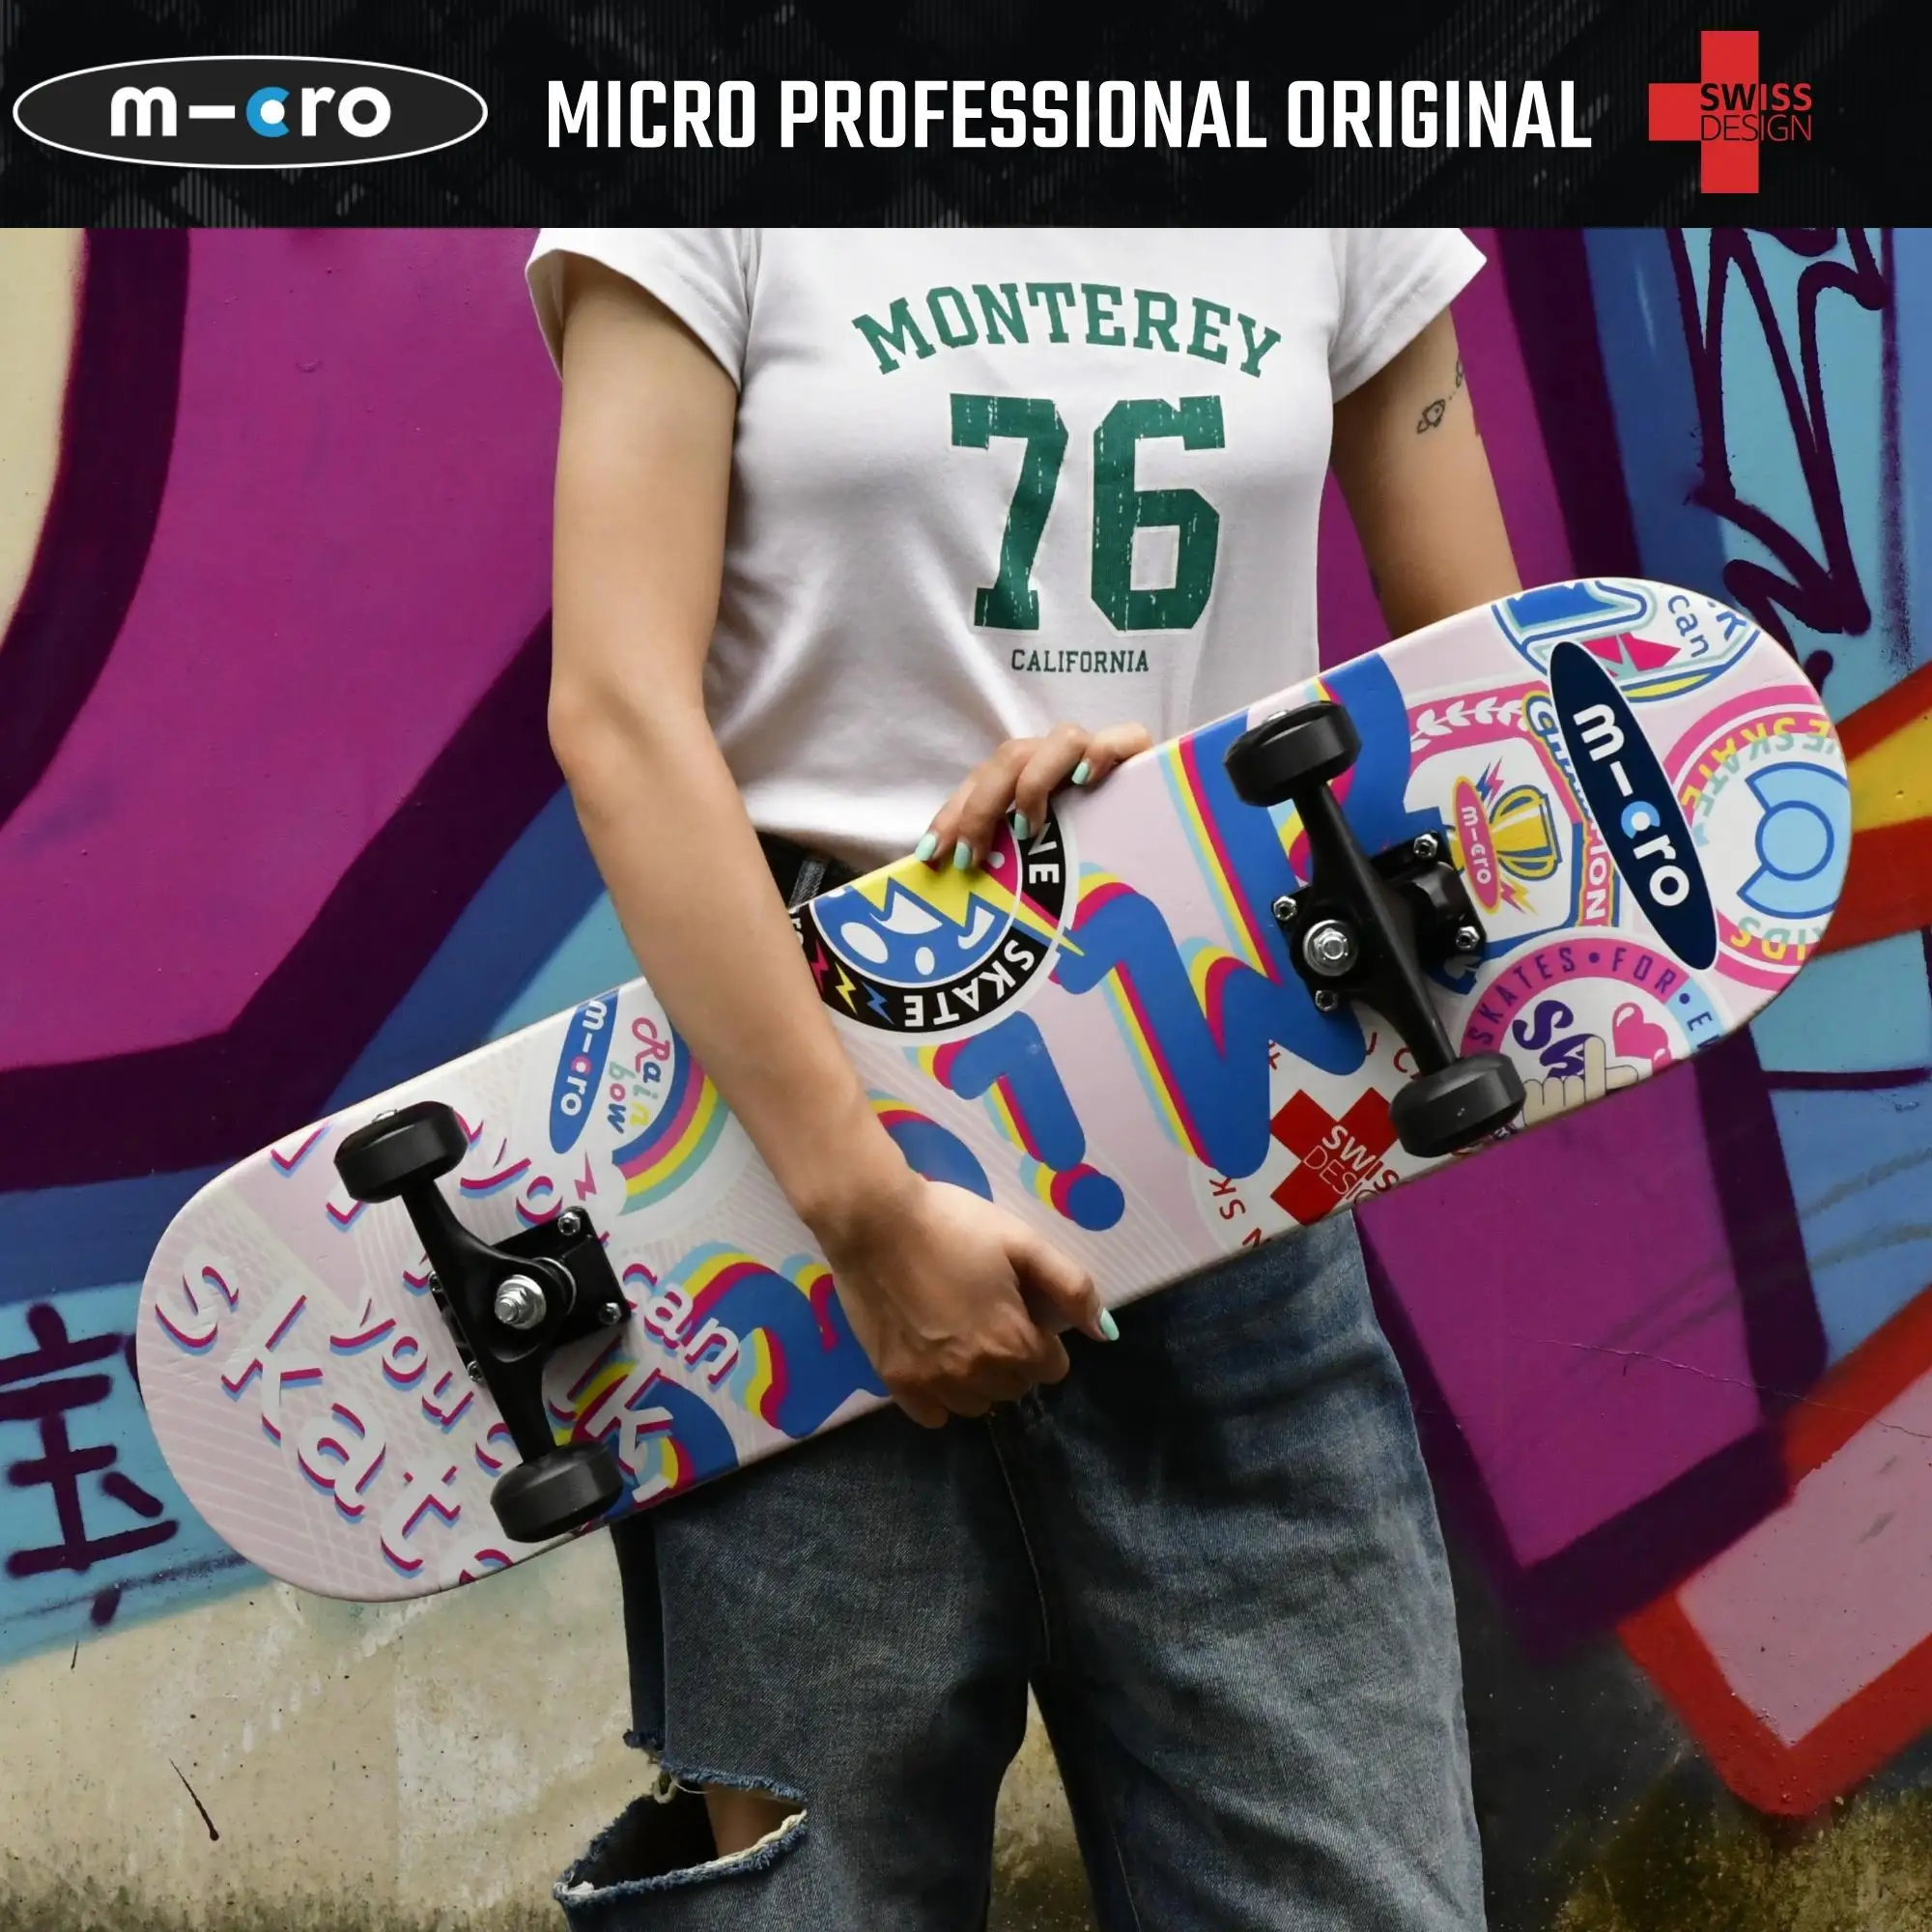 MICRO Professional Skateboard,31 Inch for Beginners Adults Teens Kids,9 Layer Maple Wood Deck,Double Kick Concave,Free Shipping